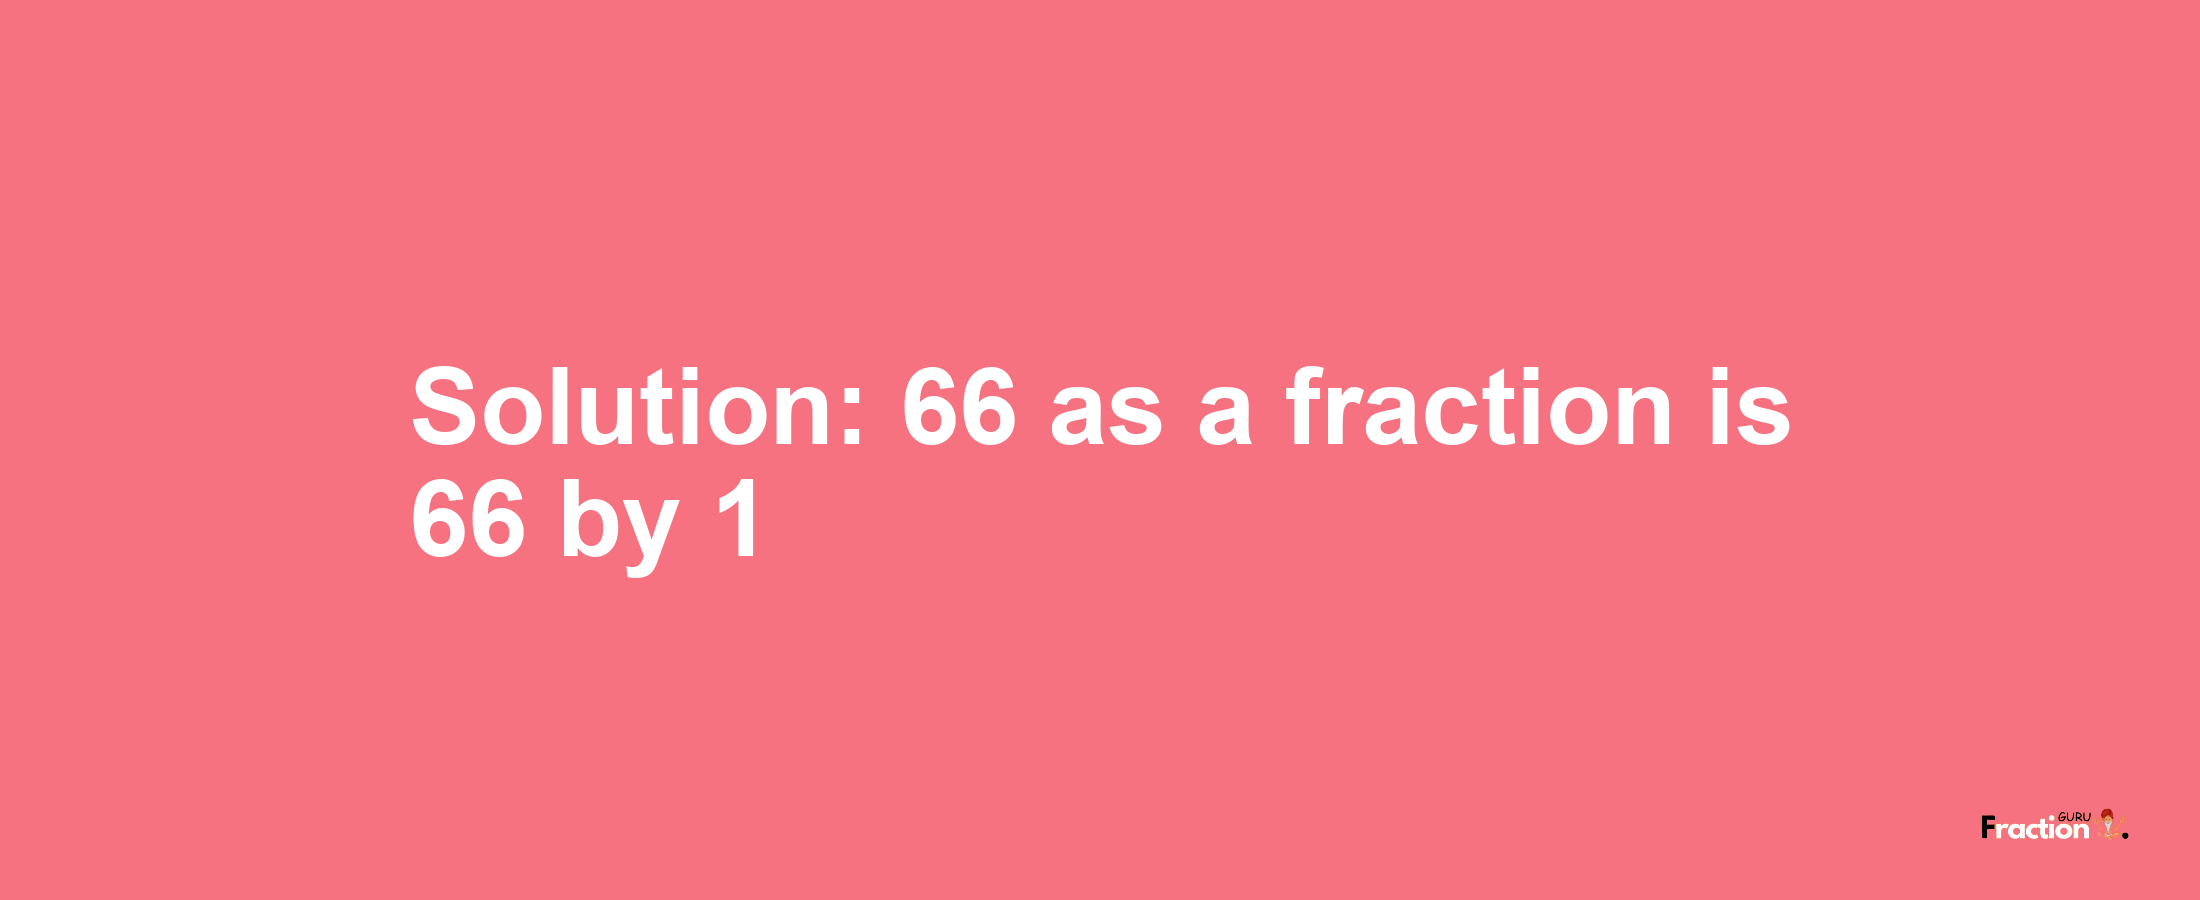 Solution:66 as a fraction is 66/1